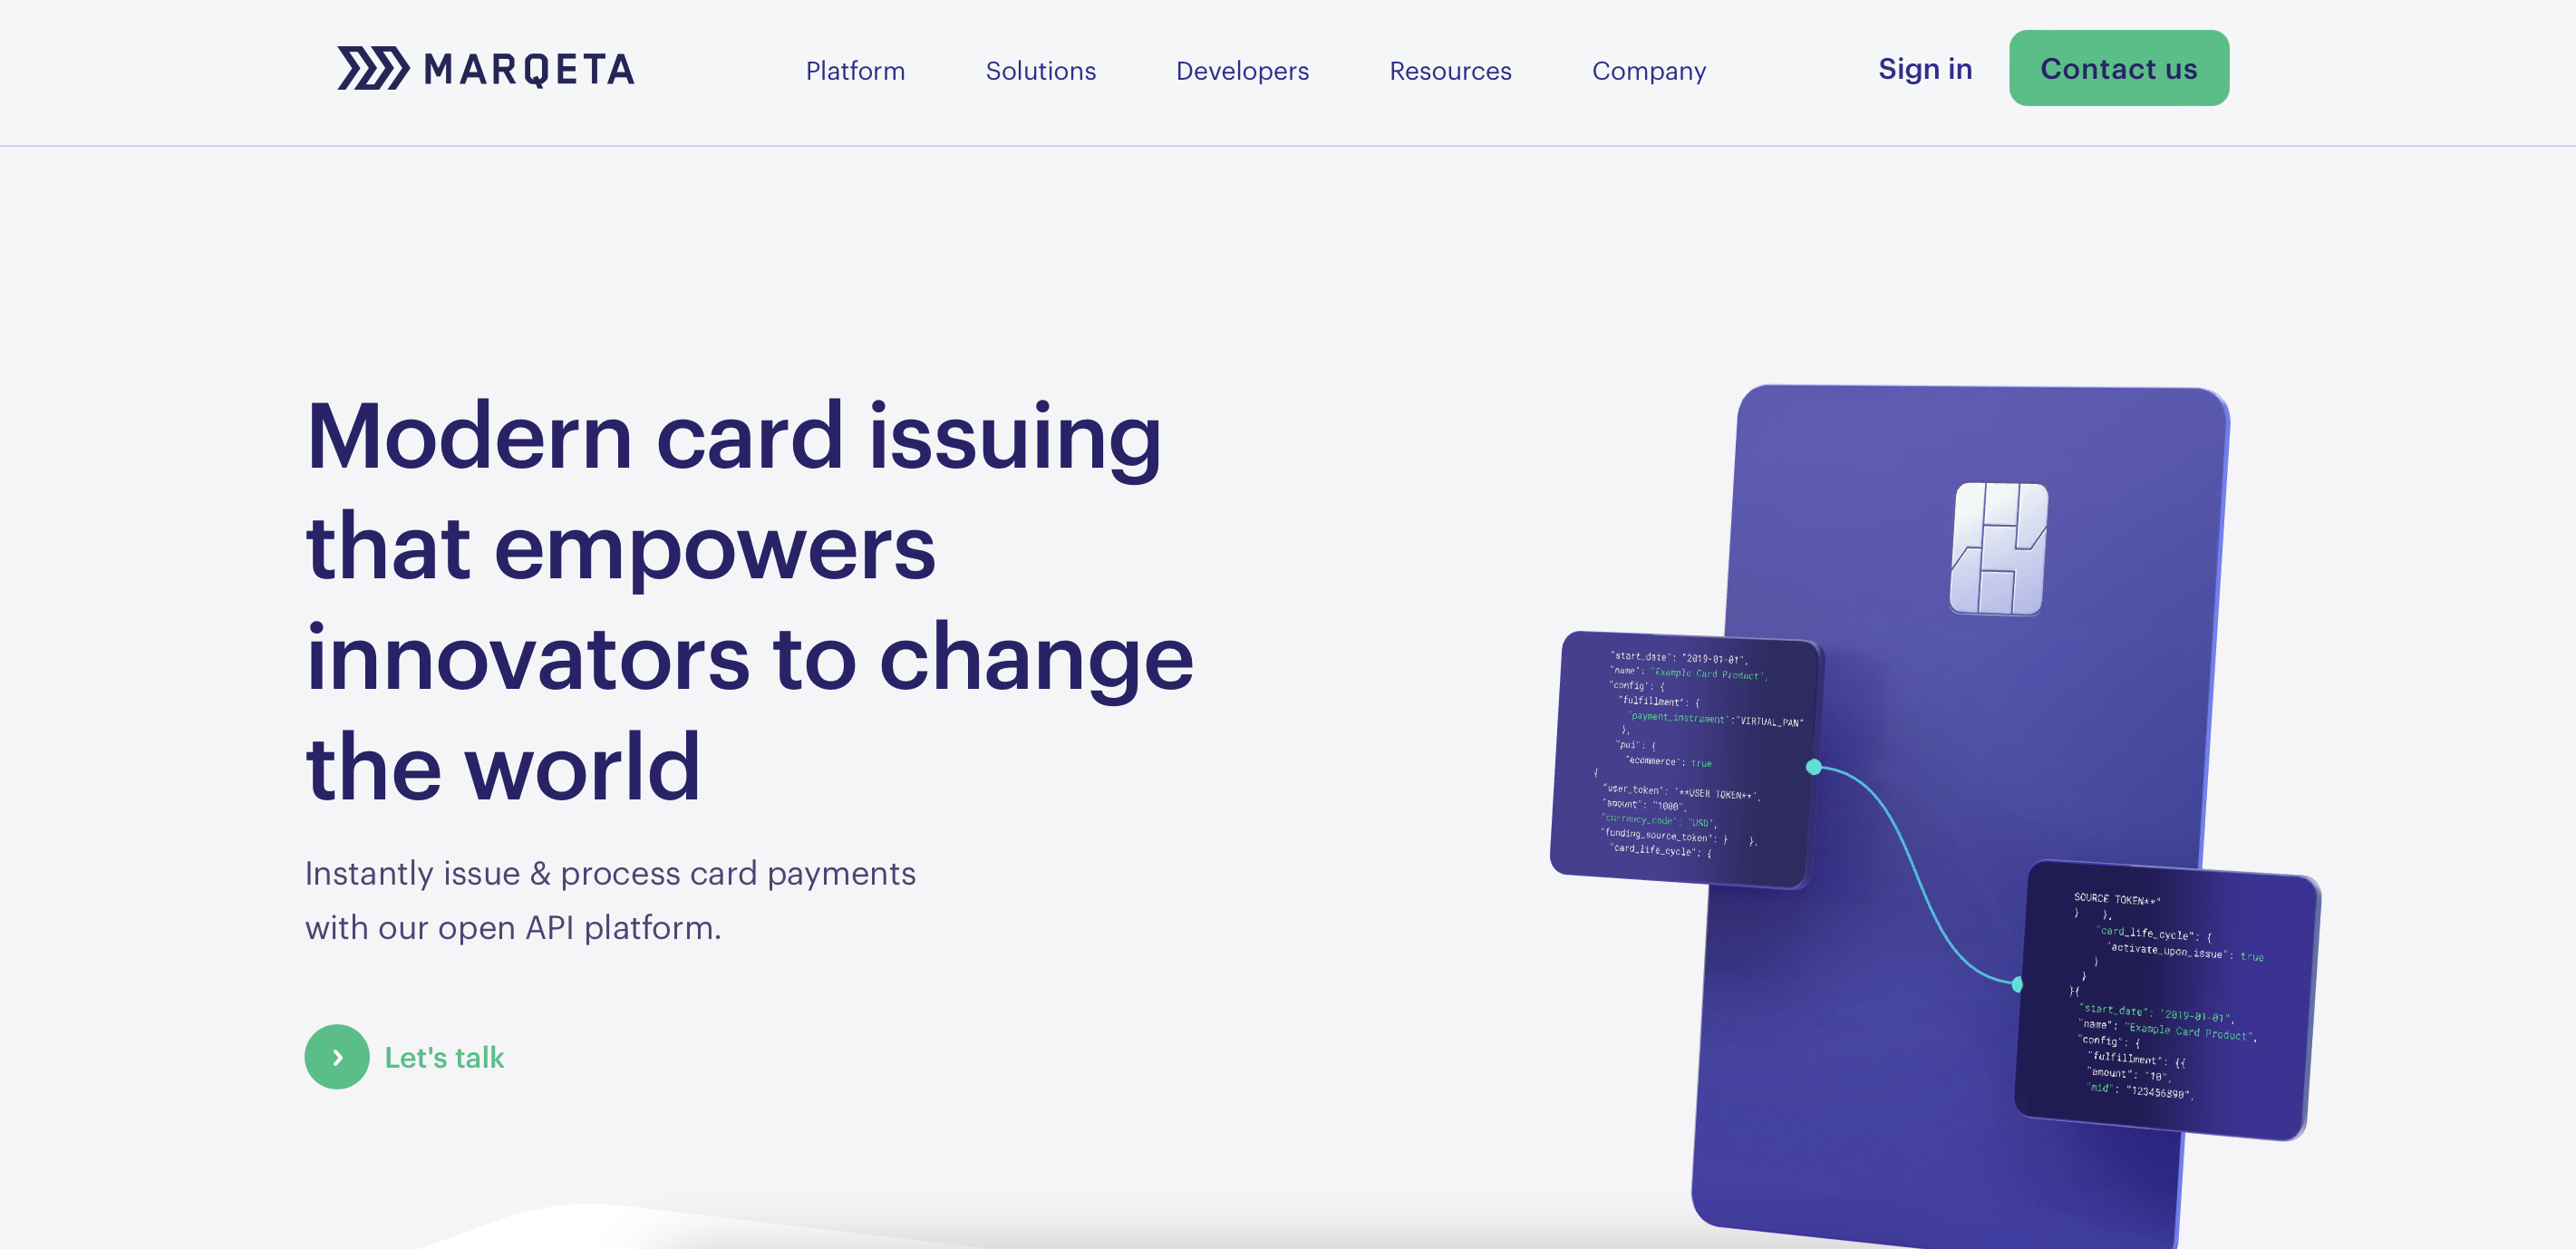 Marqeta, a BaaS provider that specializes in card issuance and payments.